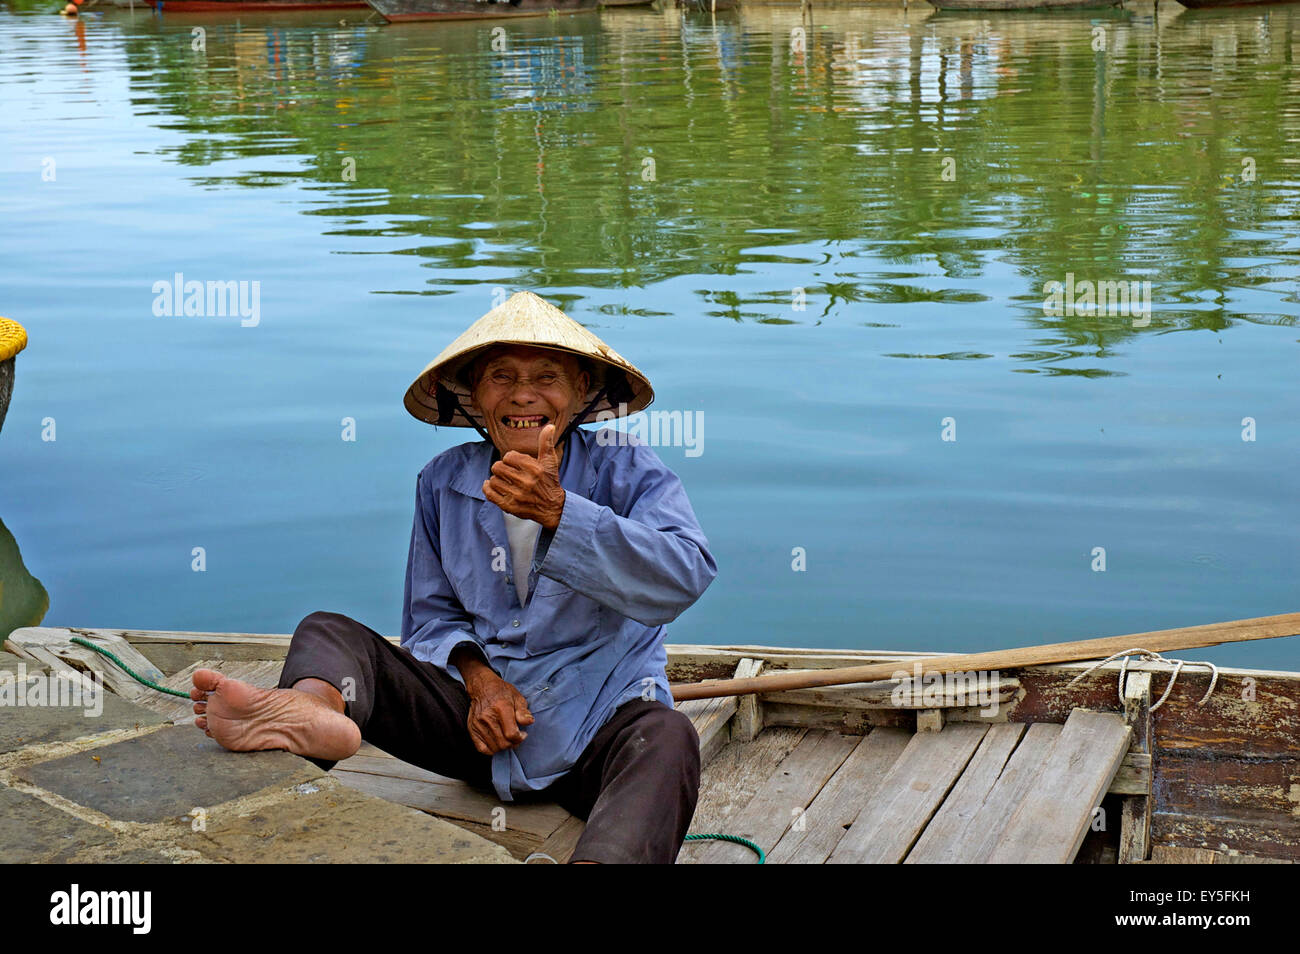 An elderly Vietnamese man, wearing a traditional conical hat, smiling and giving a thumbs up sign from a boat in Hoi An. Stock Photo